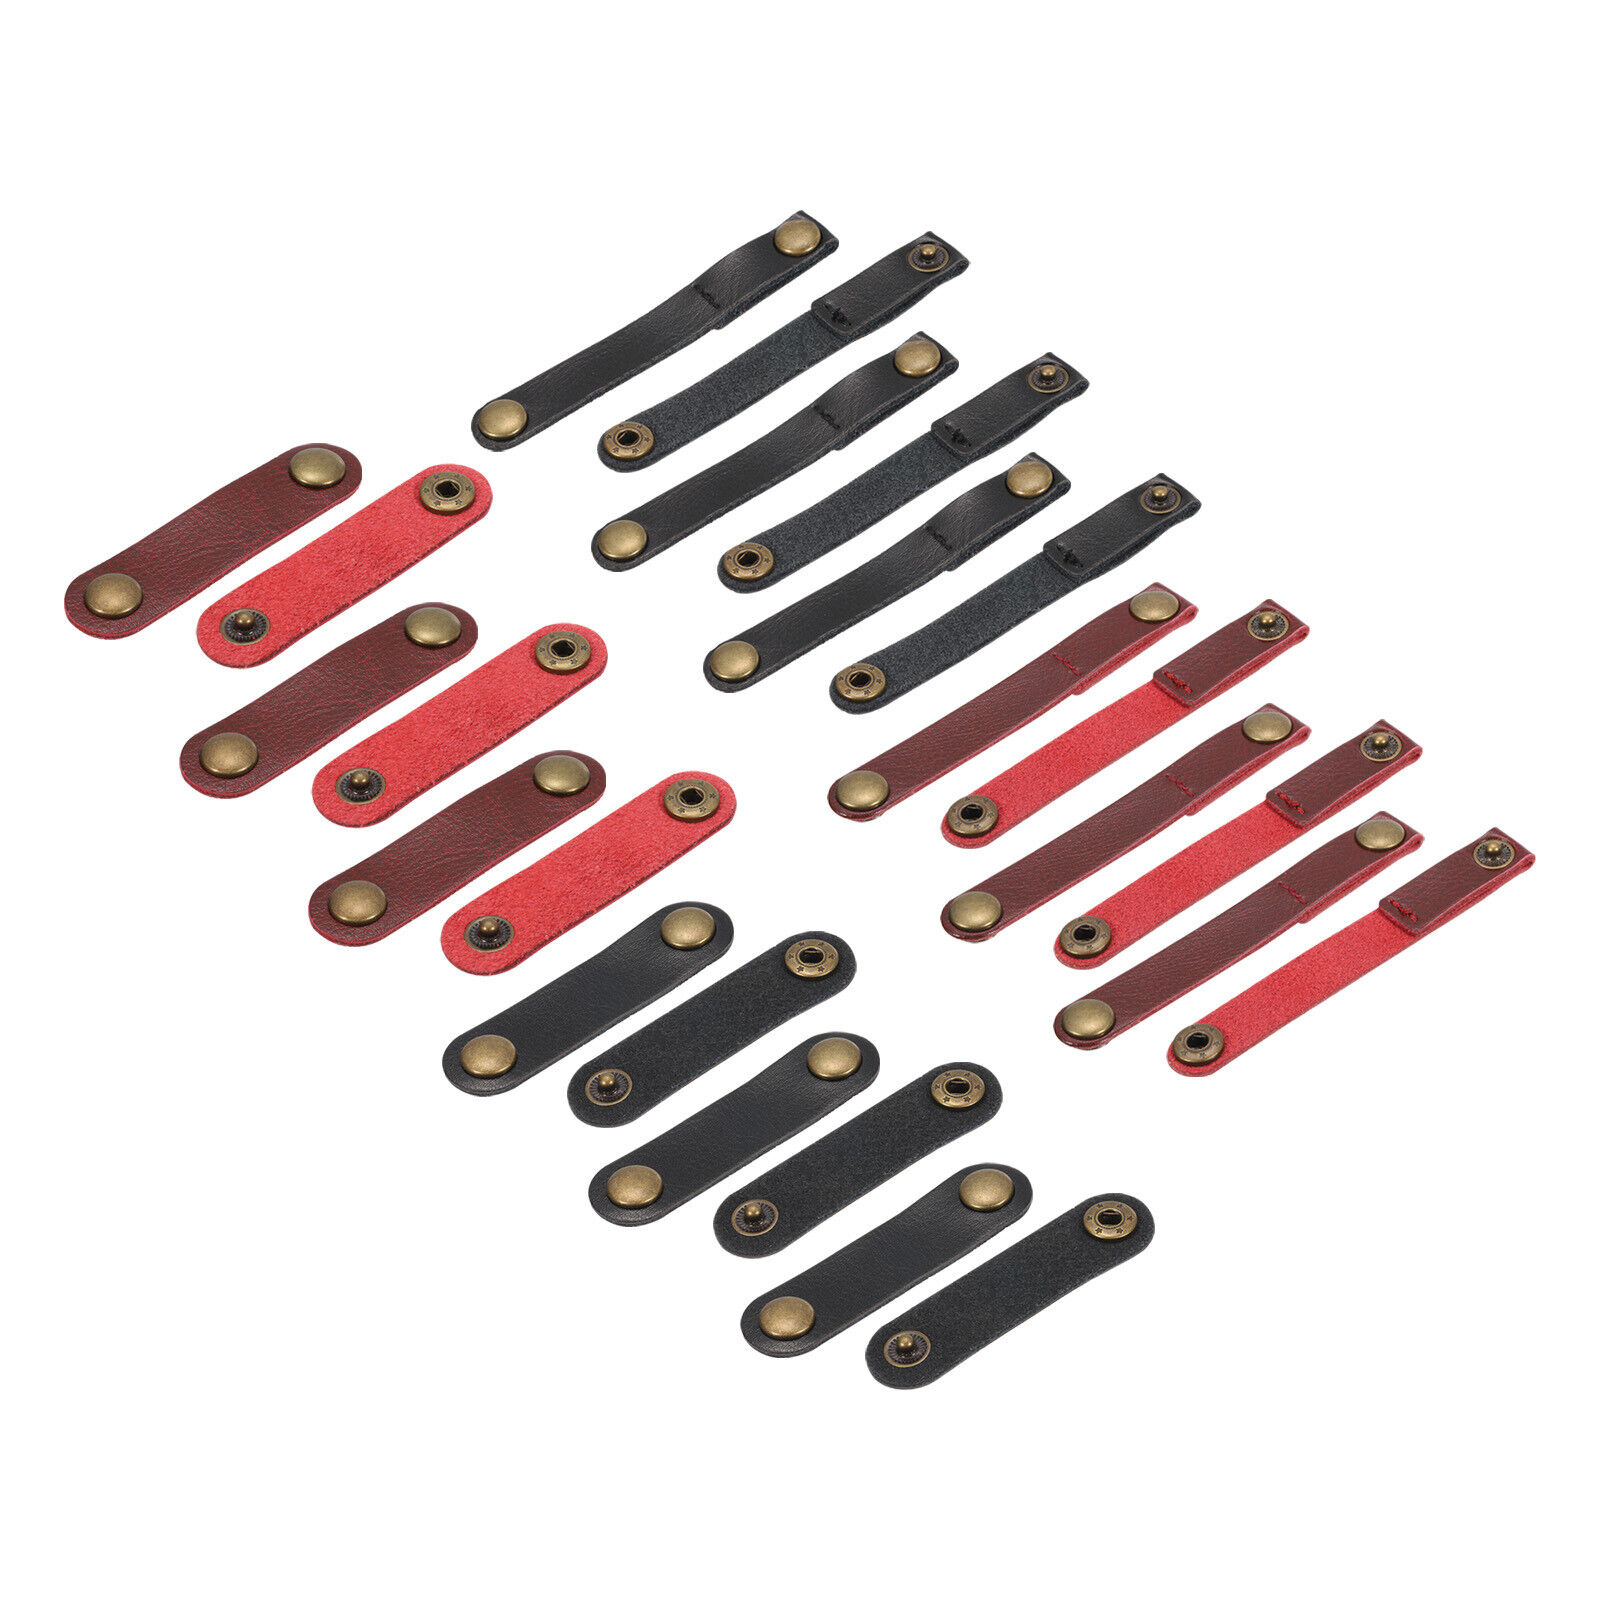 Leather Cable Straps Cable Ties Cord Organizer Black/Wine Red, 24 Pcs